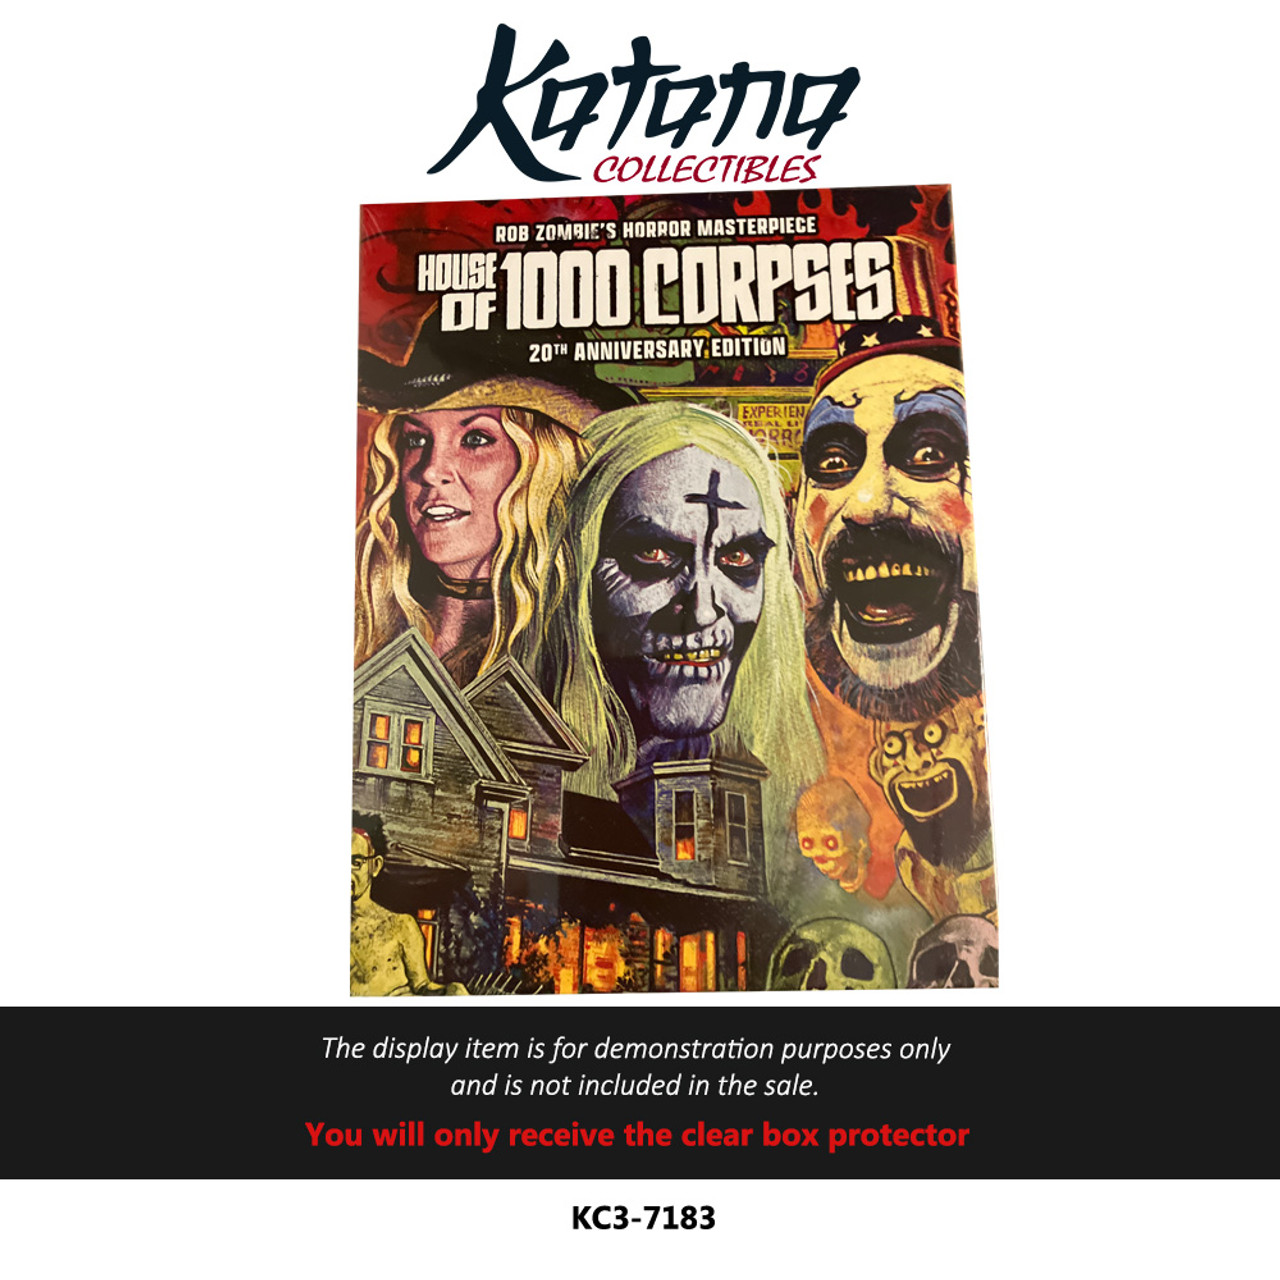 Katana Collectibles Protector For House Of 1000 Corpses 20th Anniversary Edition Blu-ray